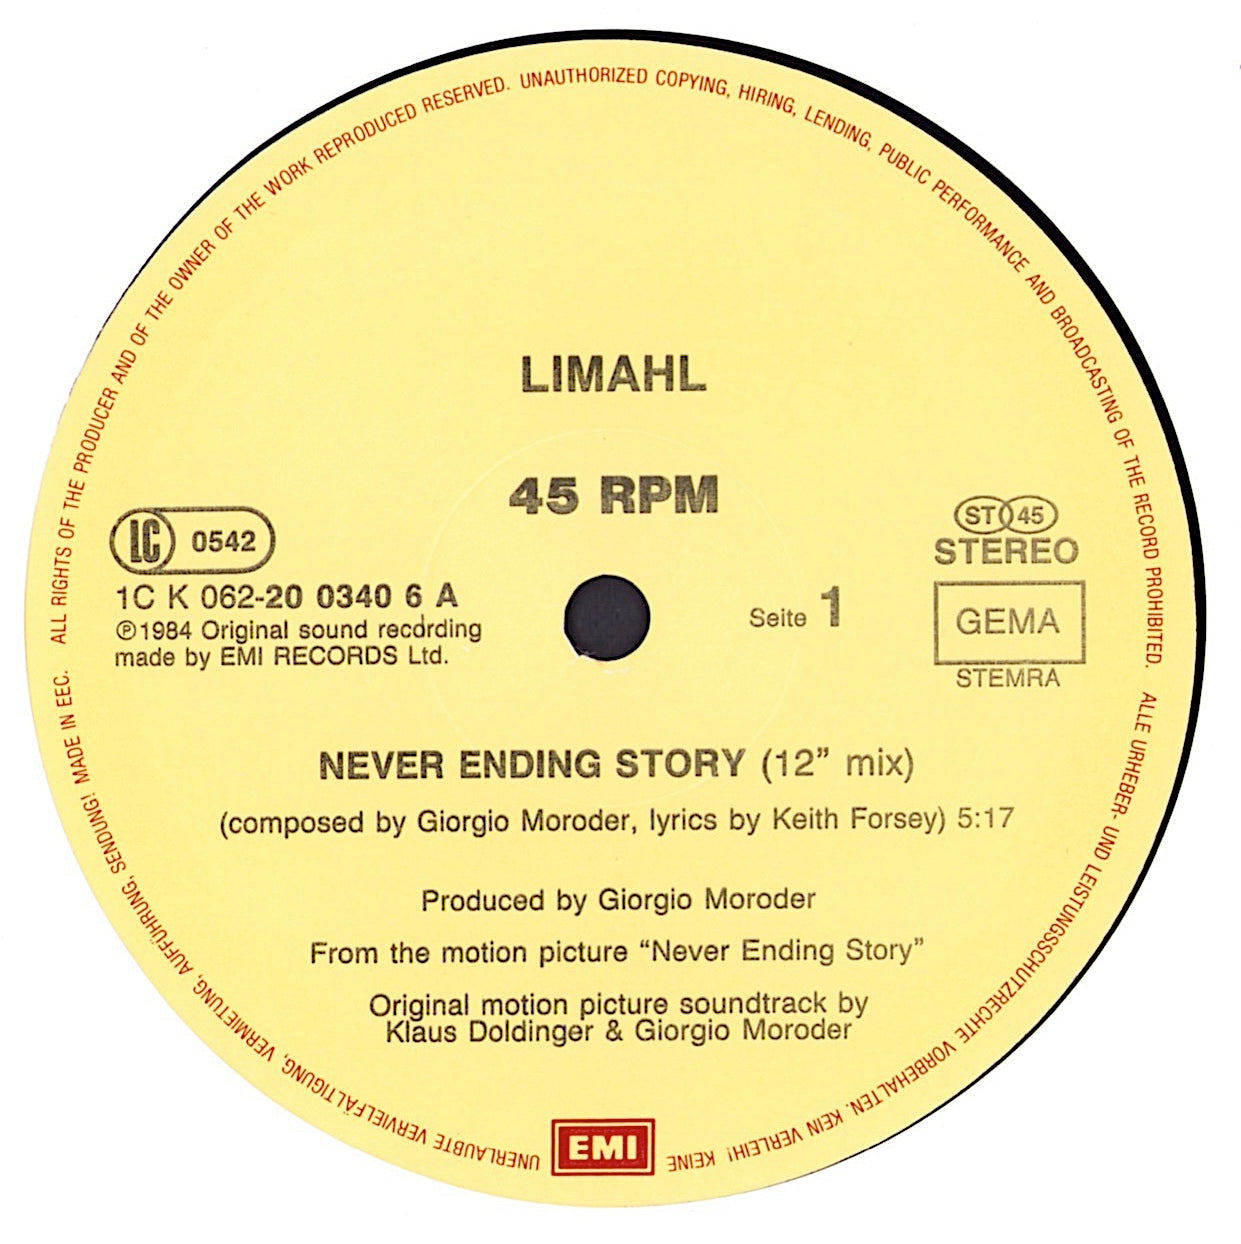 Limahl – The NeverEnding Story Special 12" Mix Vinyl 12" Maxi-Single